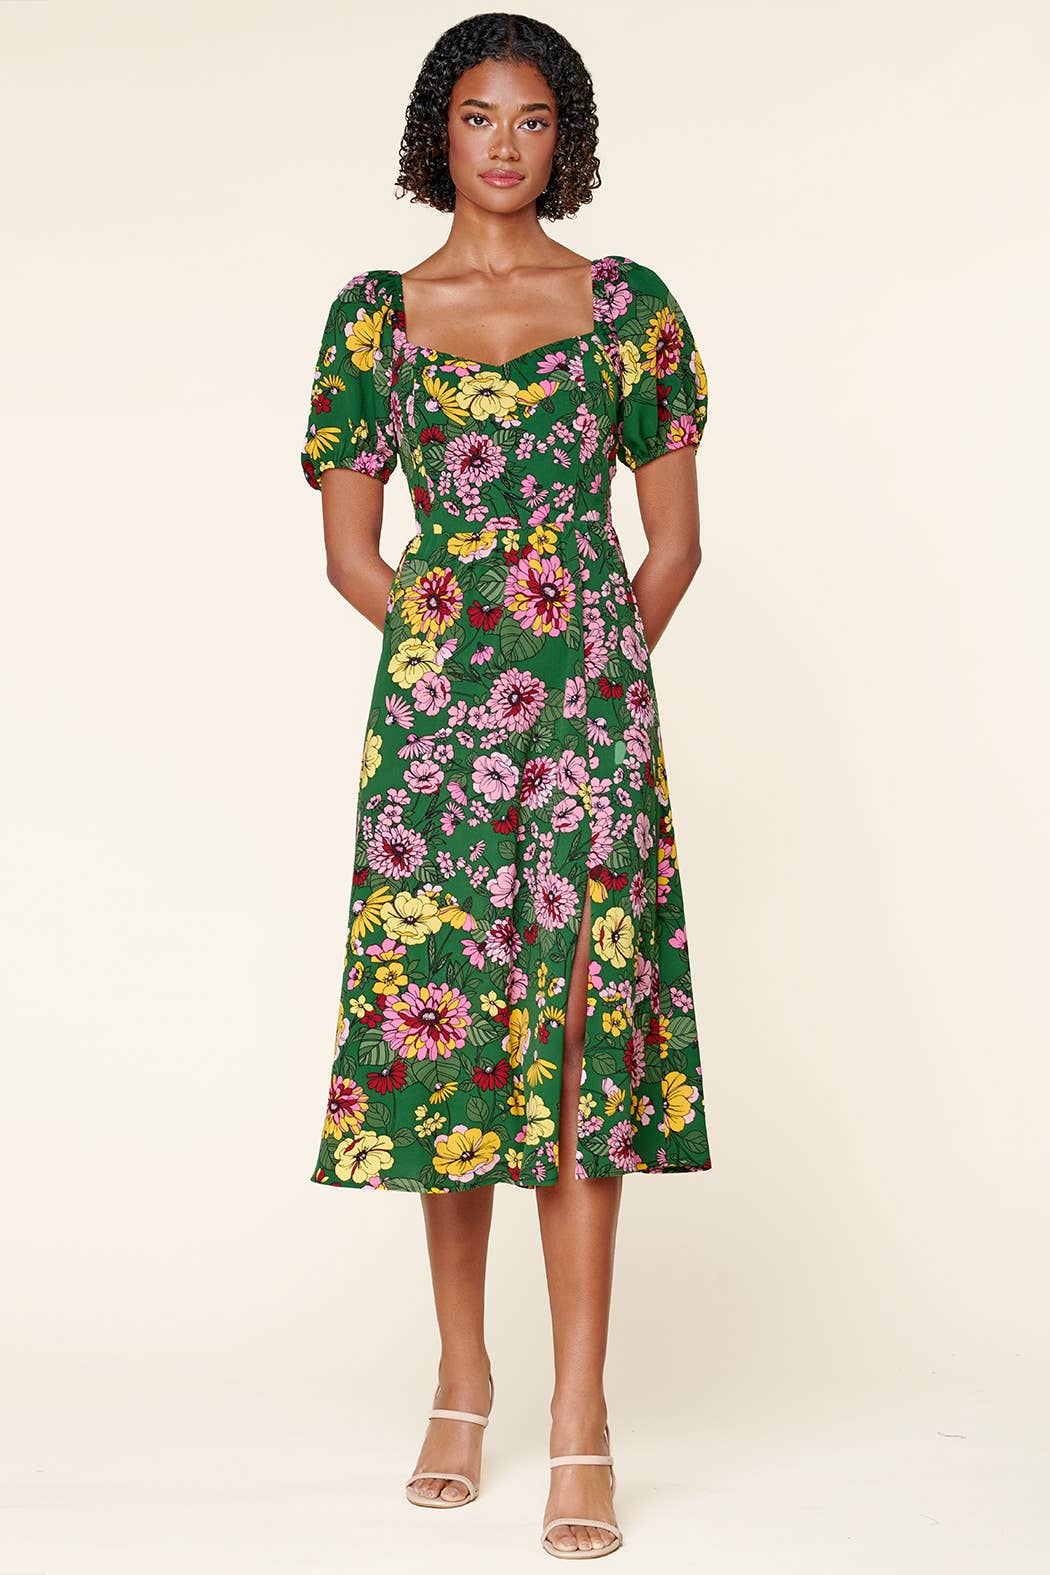 Everly Floral Alessi Puff Sleeve Midi Dress